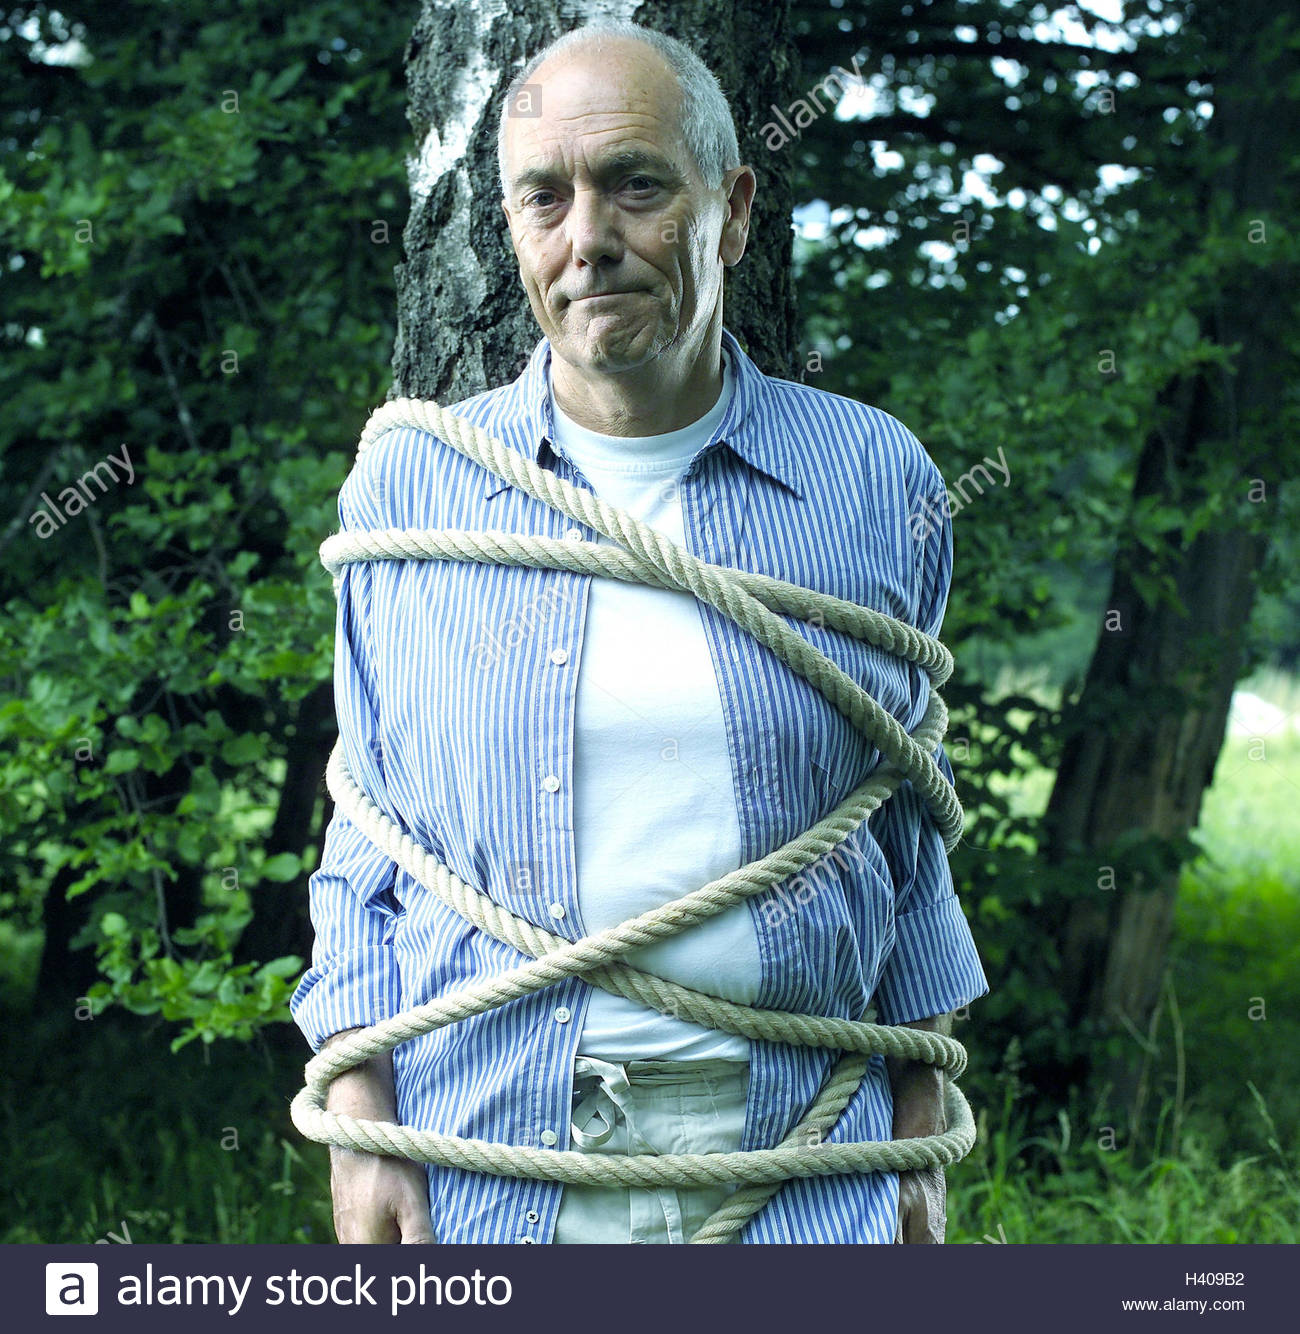 Garden, trunk, senior, tied up, half portrait, man, tree, bound,  fastenedly, rope, cable, cord, helplessness, helplessly, defenceless,  caught, trapped,